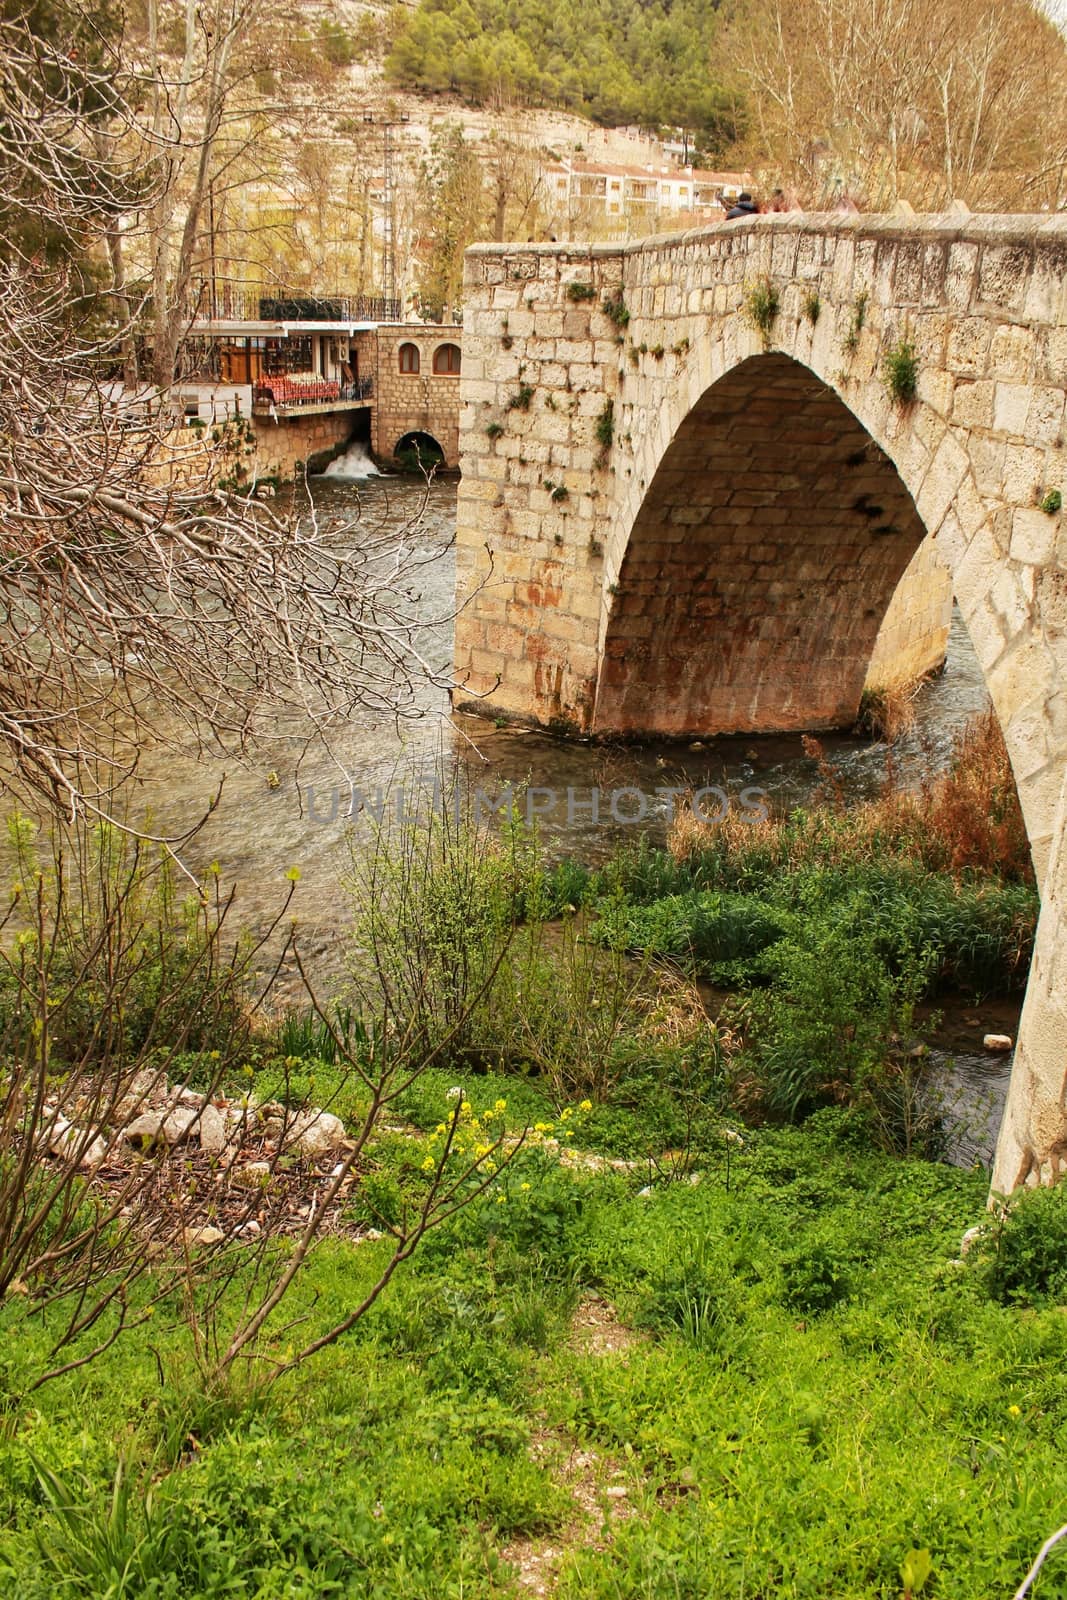 The Jucar River and old stone bridge surrounded by vegetation in Alcala del Jucar village